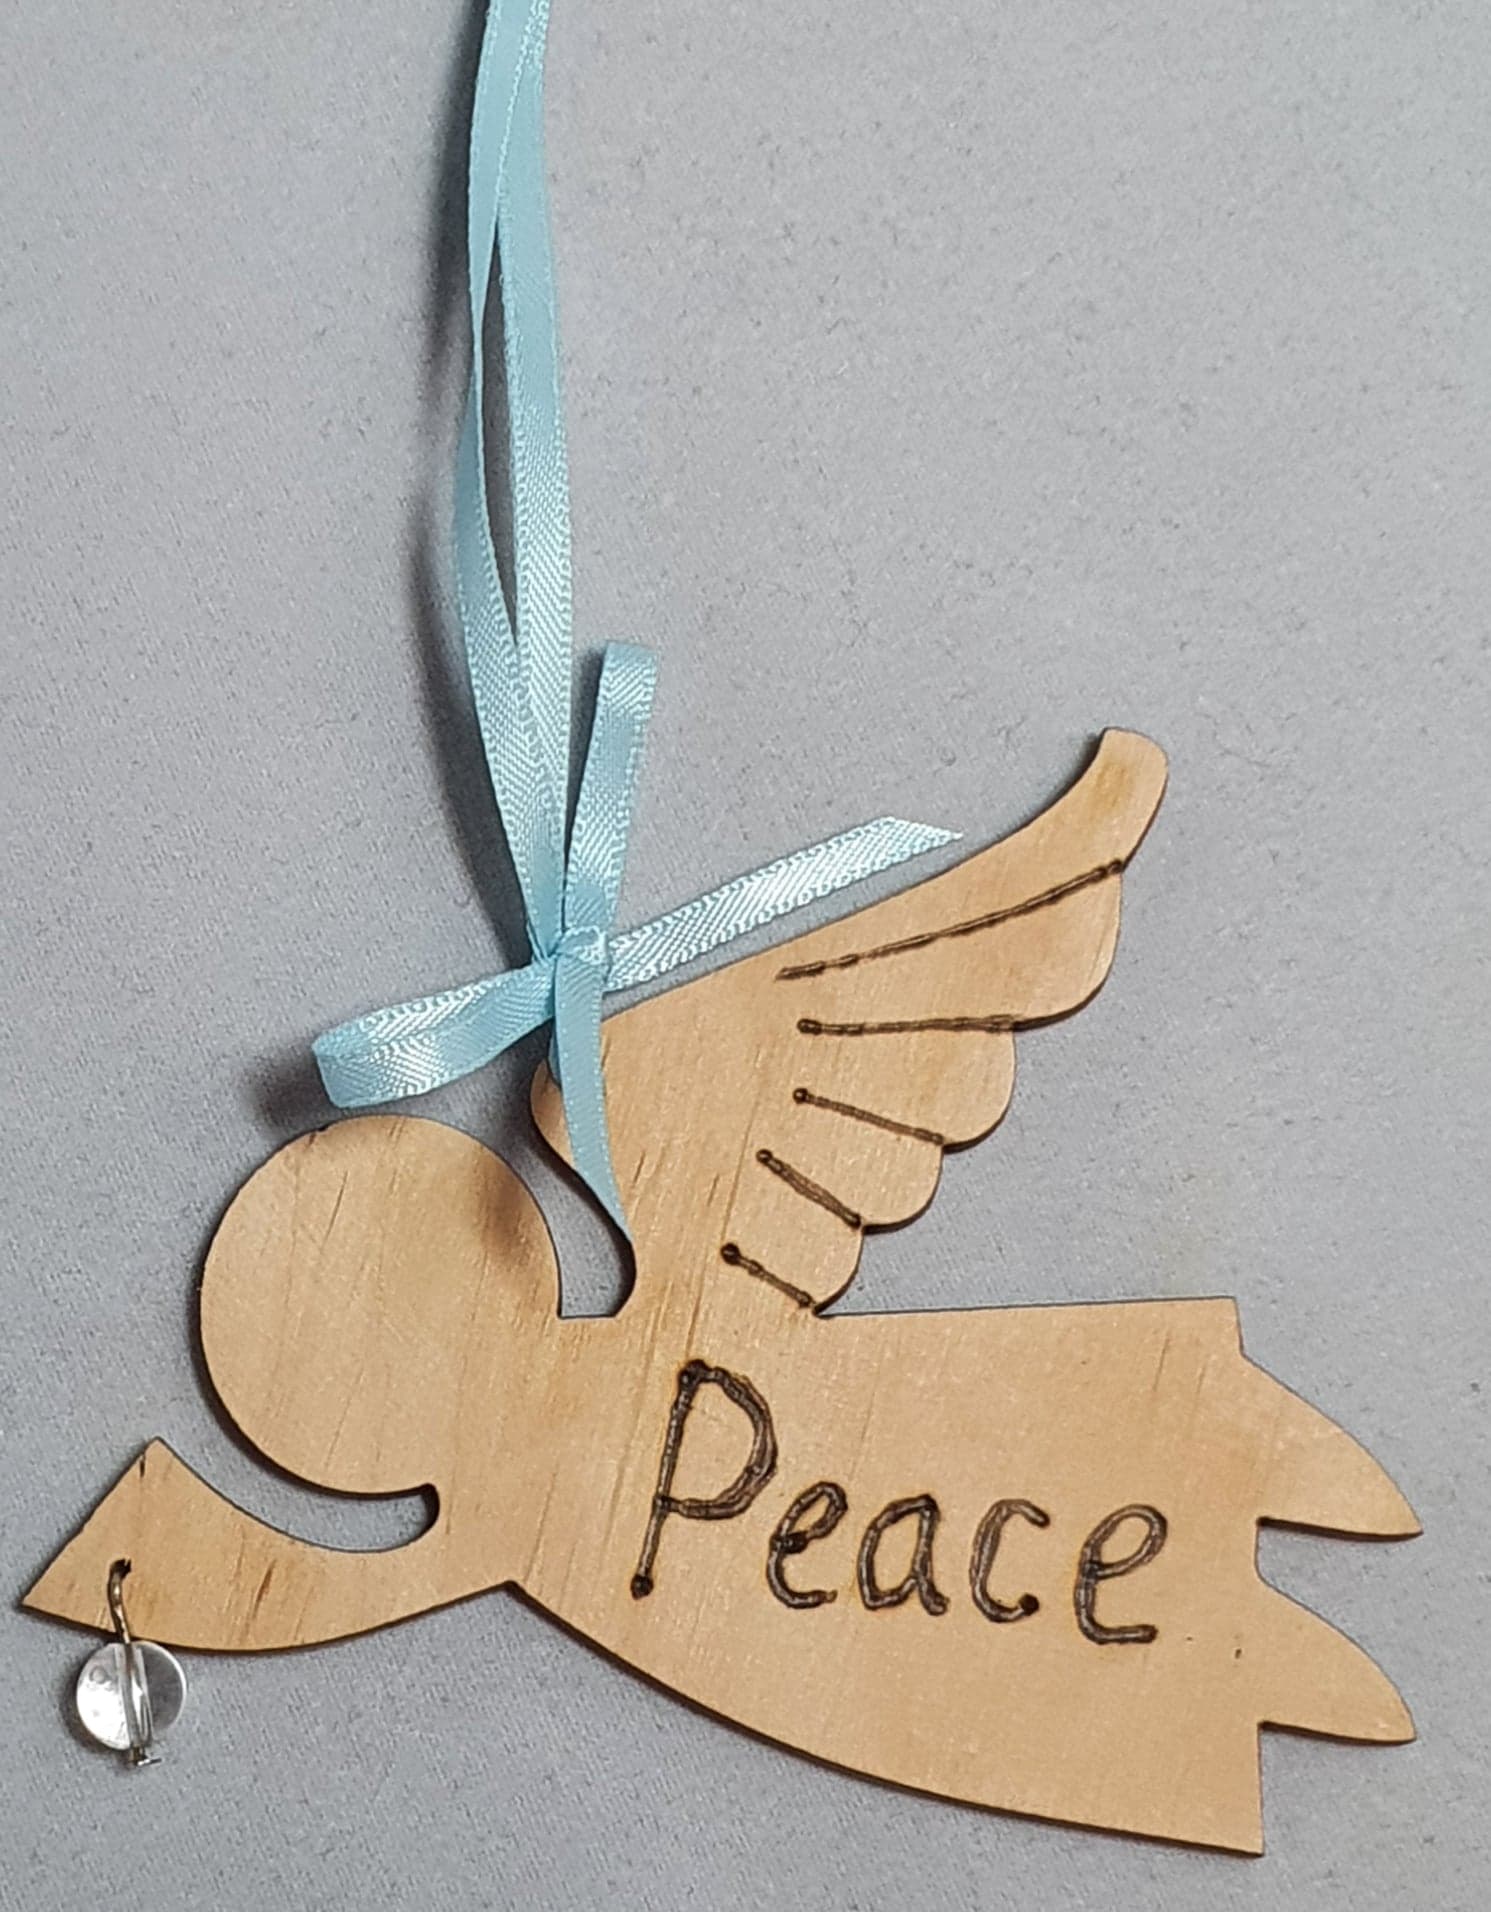 Rustic Charm Flying Angel with word "Peace" Clear Quartz